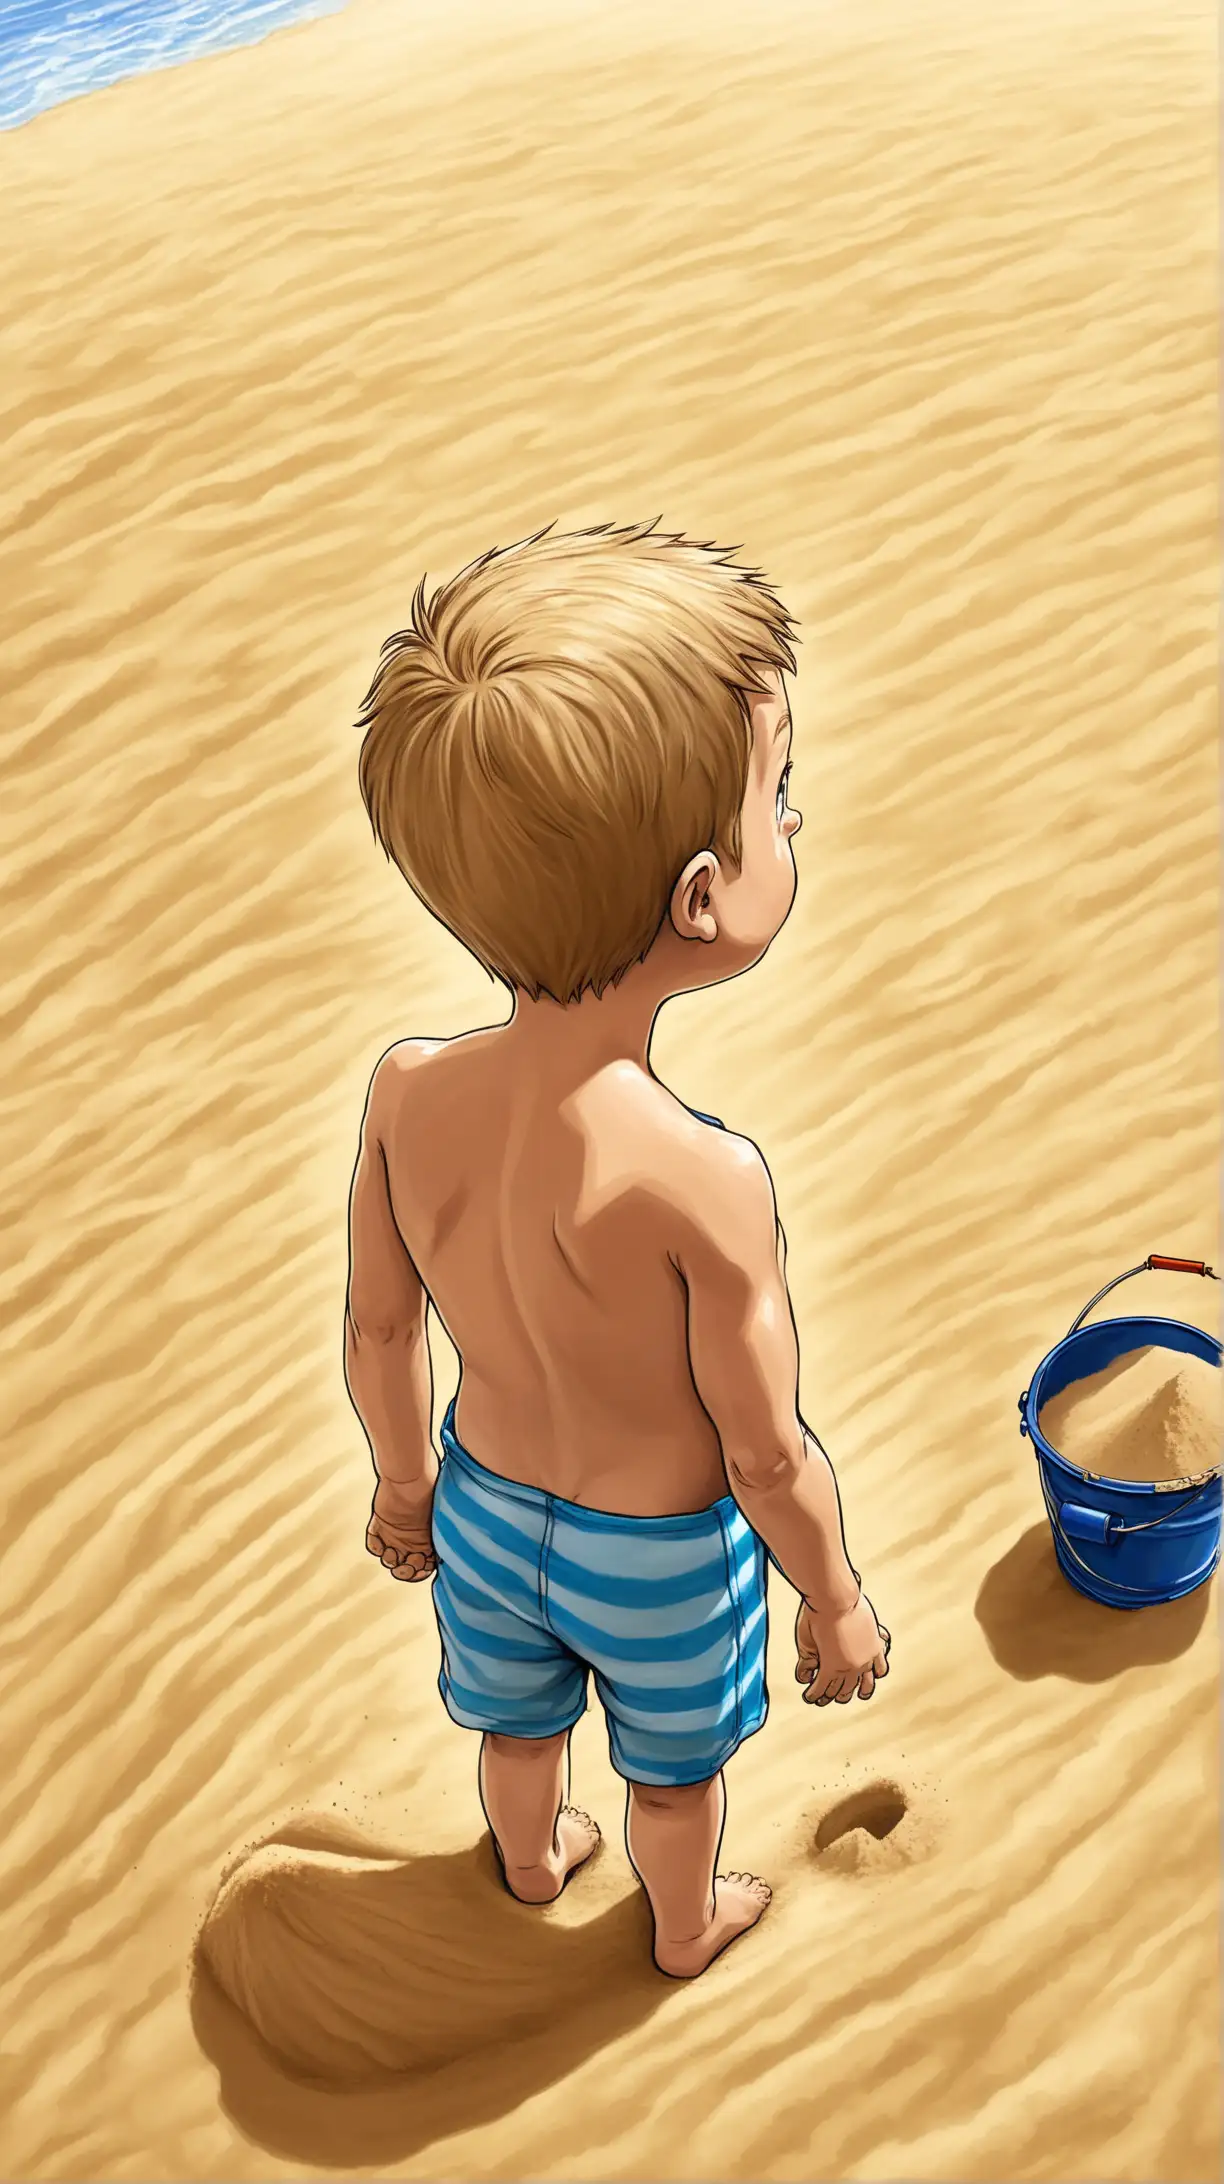 Cartoony color:   From behind extreme high angle of a four year old boy in a bathing suit with a pale of sand in one hand and a little shove in the other.  His head is tilted back as he looks up at the sky